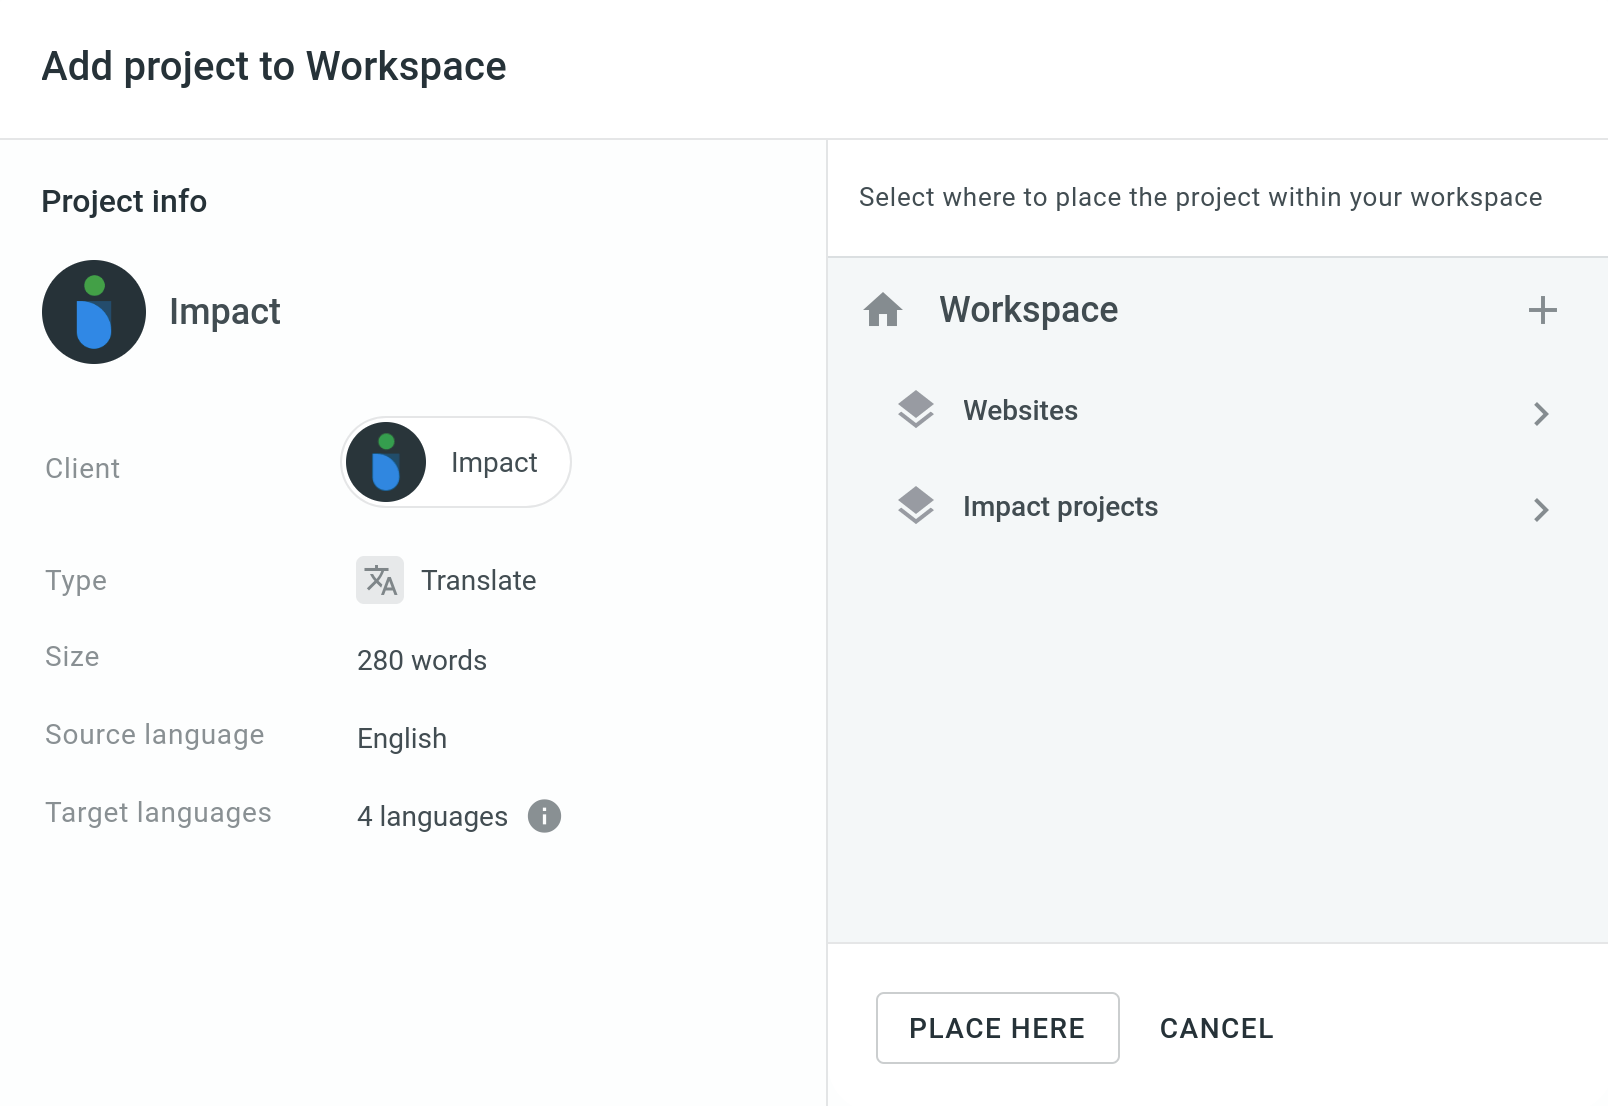 Add Project to Workspace